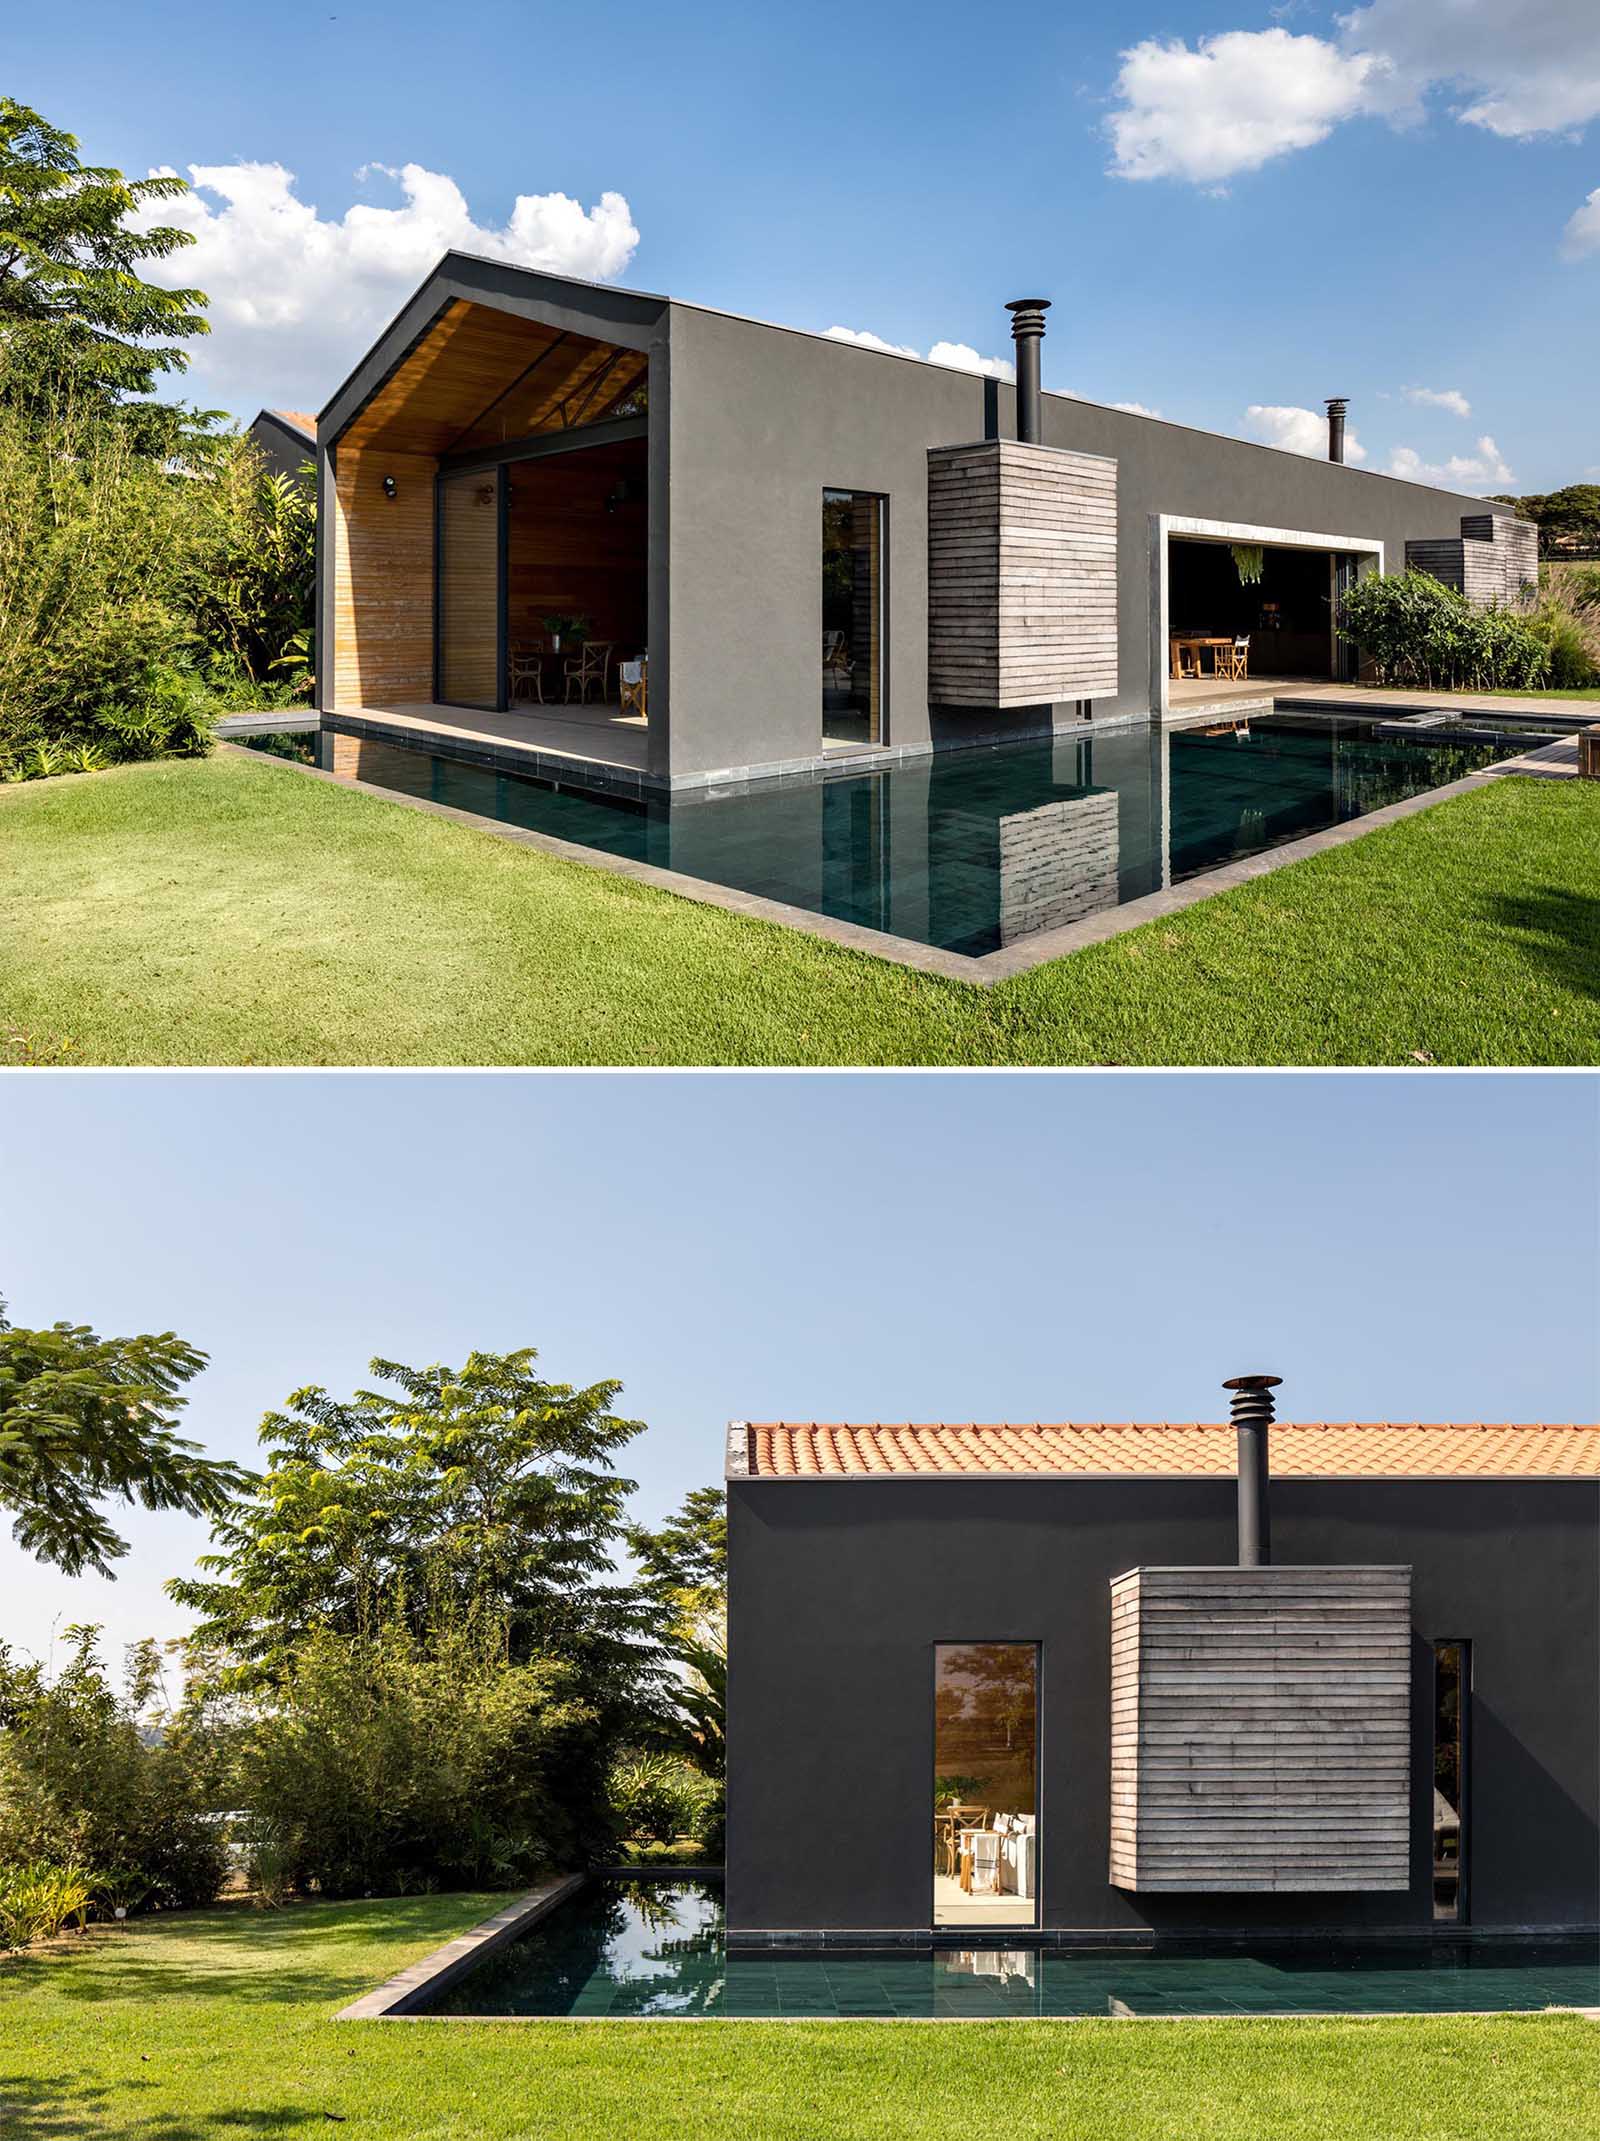 The exterior of this modern home is a black-painted mass, contrasting the surrounding nature, and providing a bold backdrop for the outdoors spaces, like the patio and swimming pool.